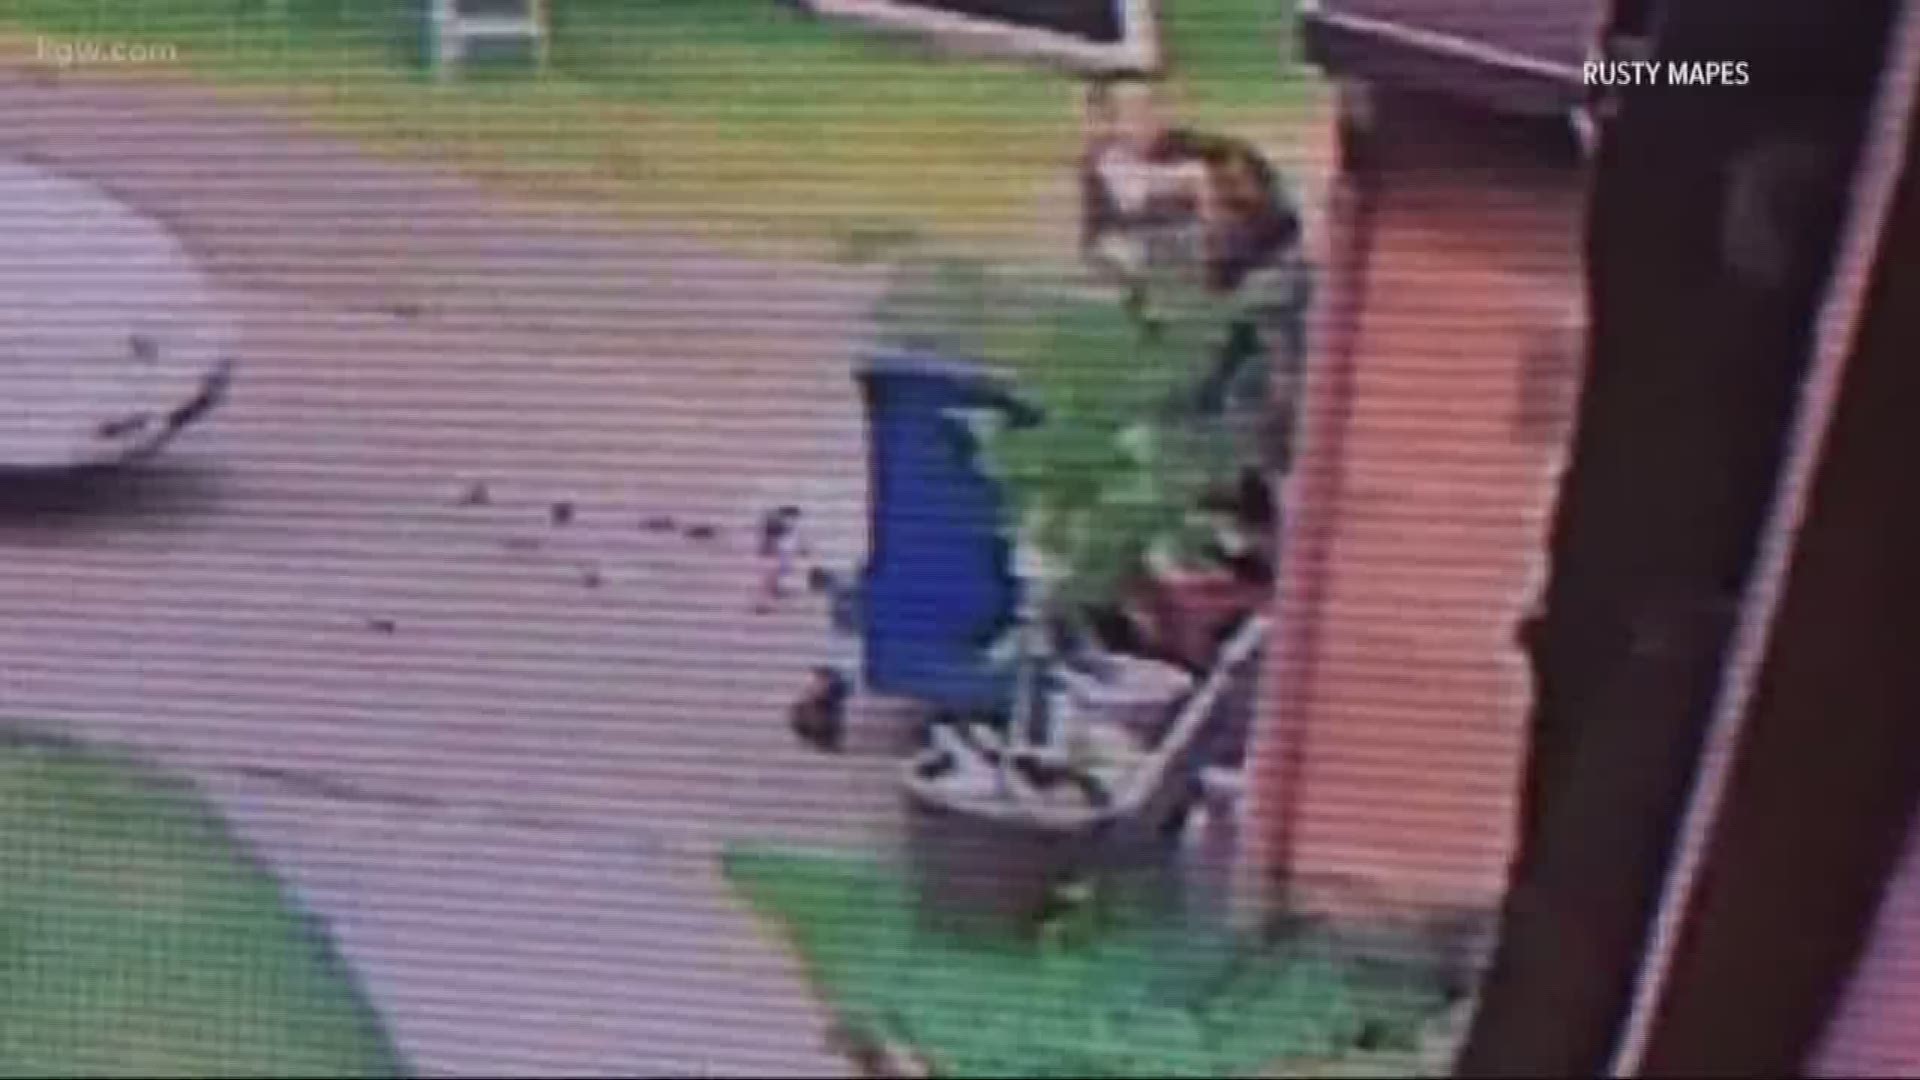 Home surveillance video captured the violent confrontation between the suspect, later identified as James M. Kelly, and the deputy moments before the shooting.